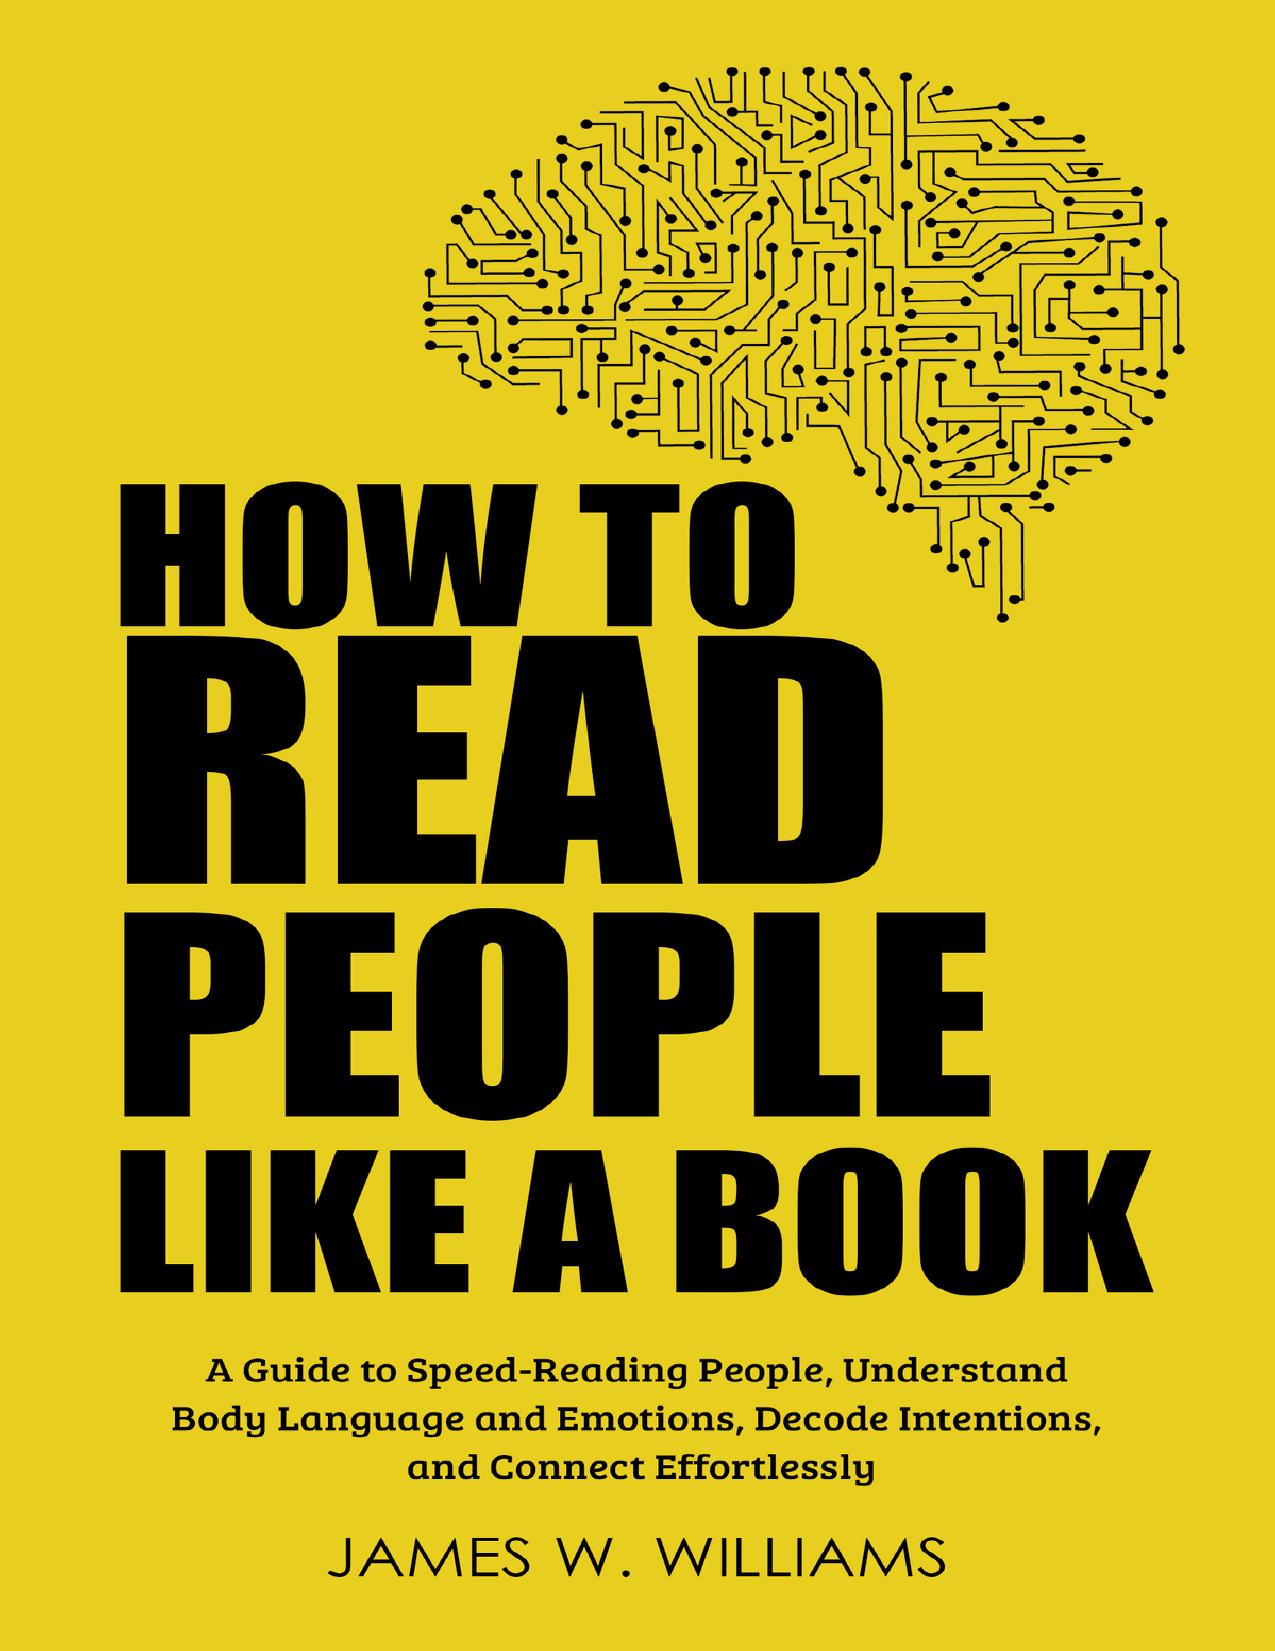 How to Read People Like a Book: A Guide to Speed-Reading People, Understand Body Language and Emotions, Decode Intentions, and Connect Effortlessly (Practical Emotional Intelligence Book 6) by W. Williams James